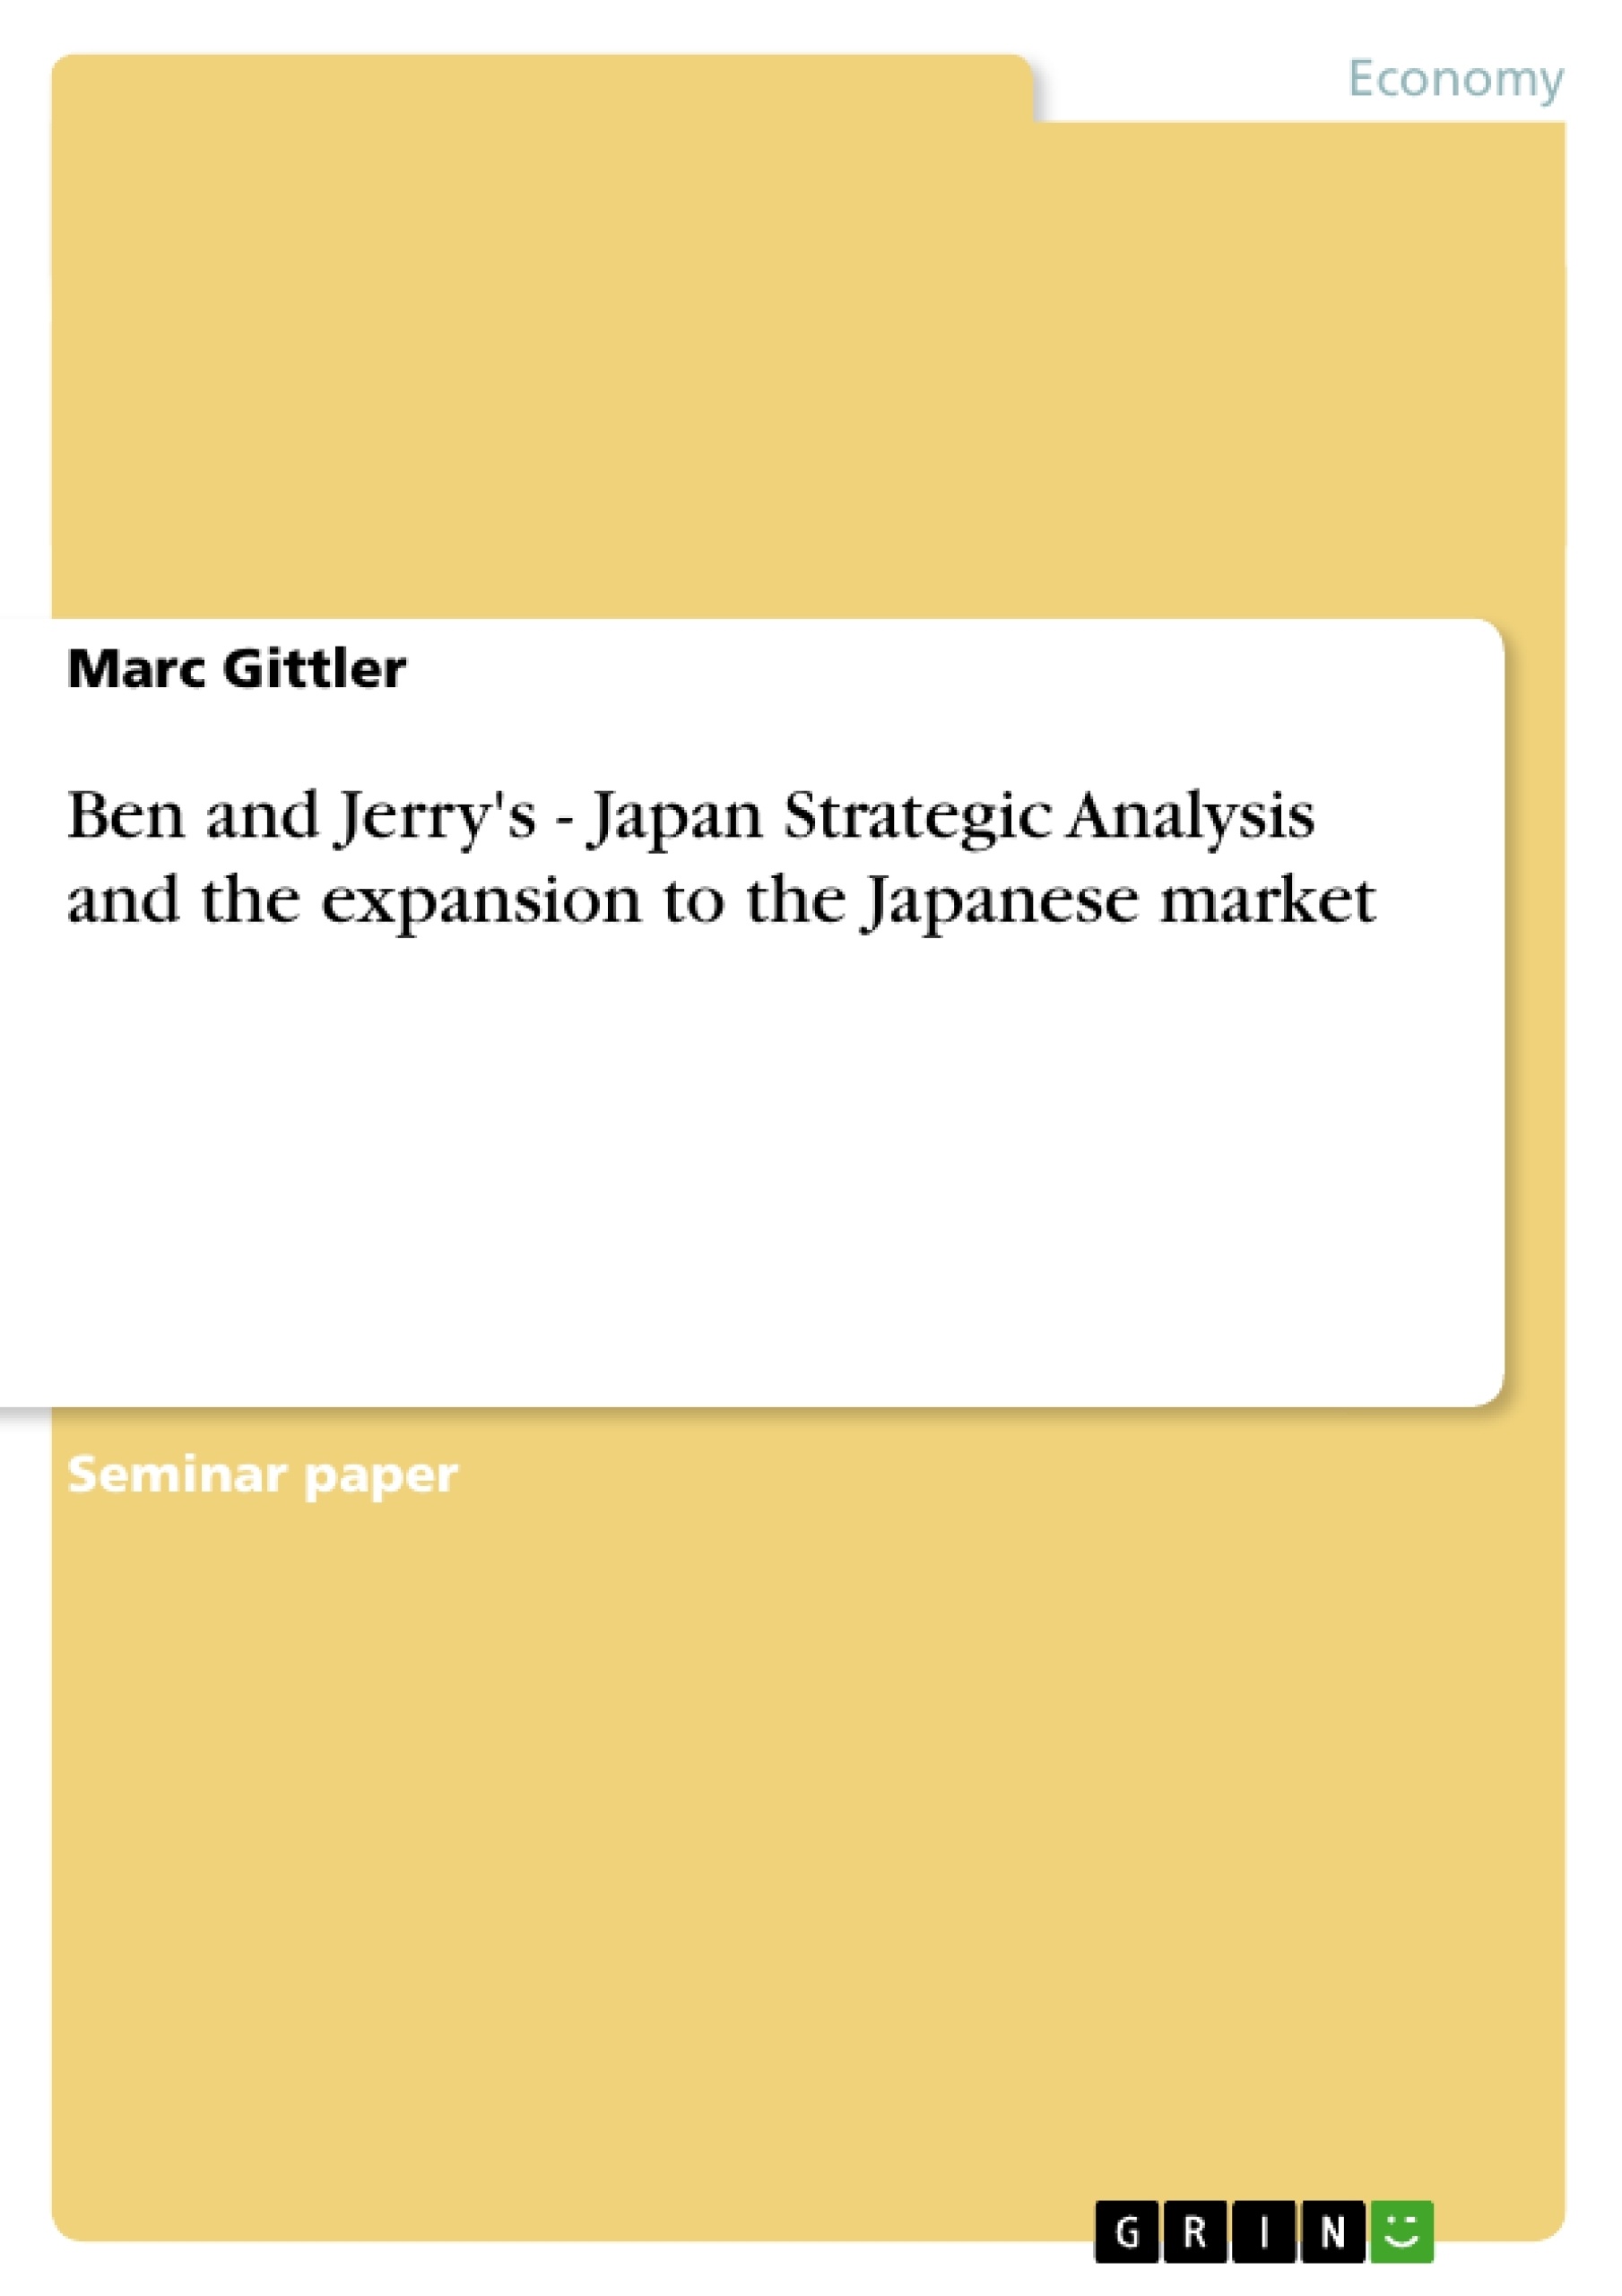 Titre: Ben and Jerry's - Japan Strategic Analysis and the expansion to the Japanese market